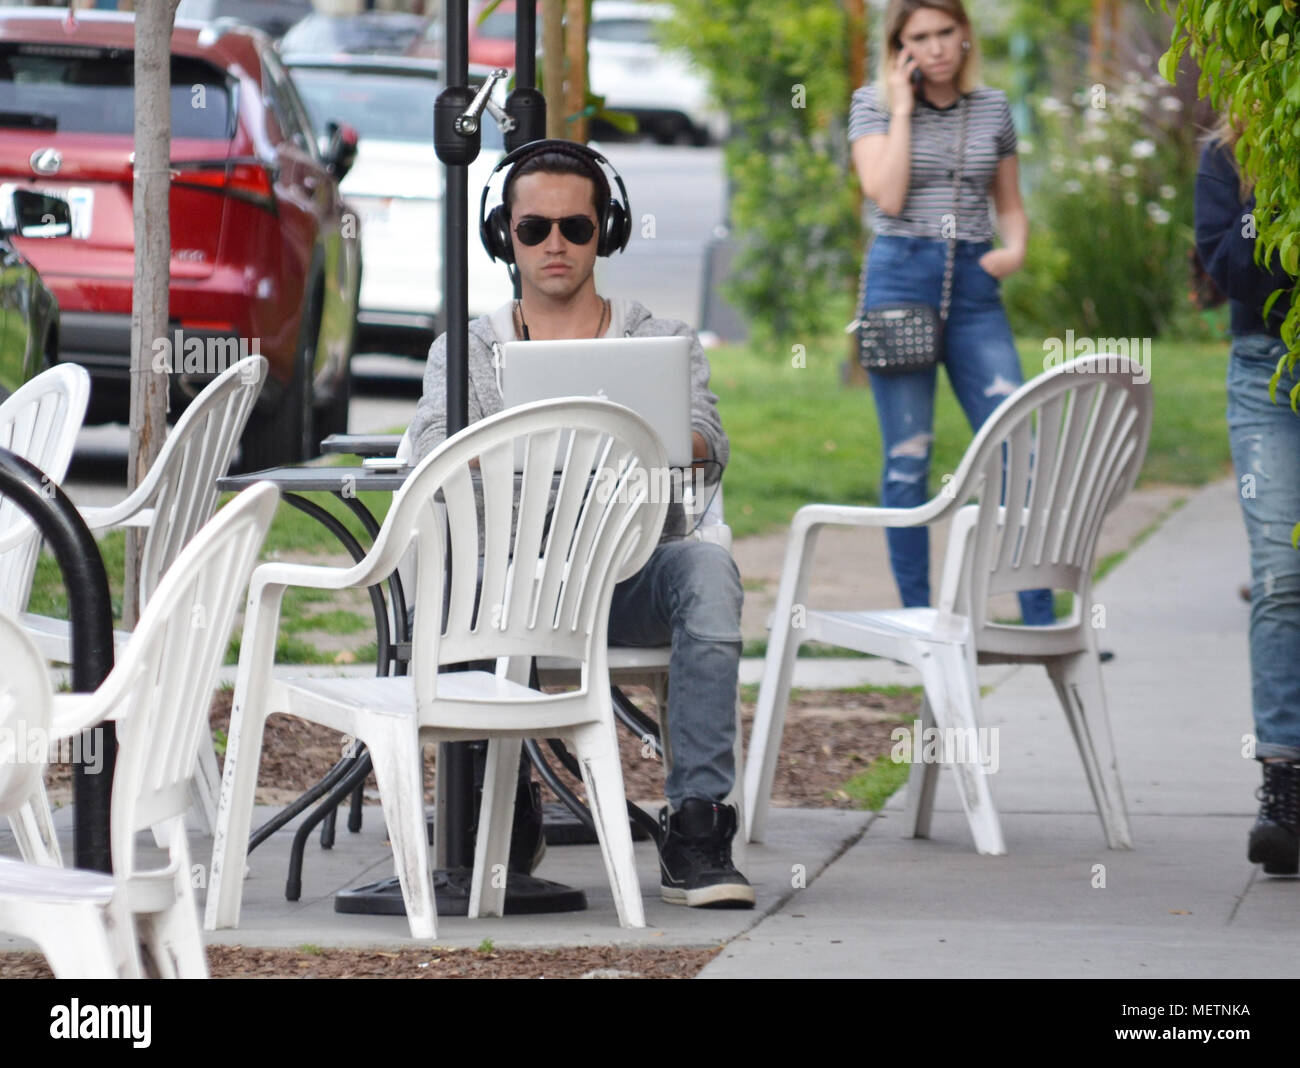 Los Angeles, CA, USA. 21st Apr, 2018. Ryan McCartan out and about in Los Angeles on a beautiful day. Credit: Media Punch For Iconic/Alamy Live News Stock Photo